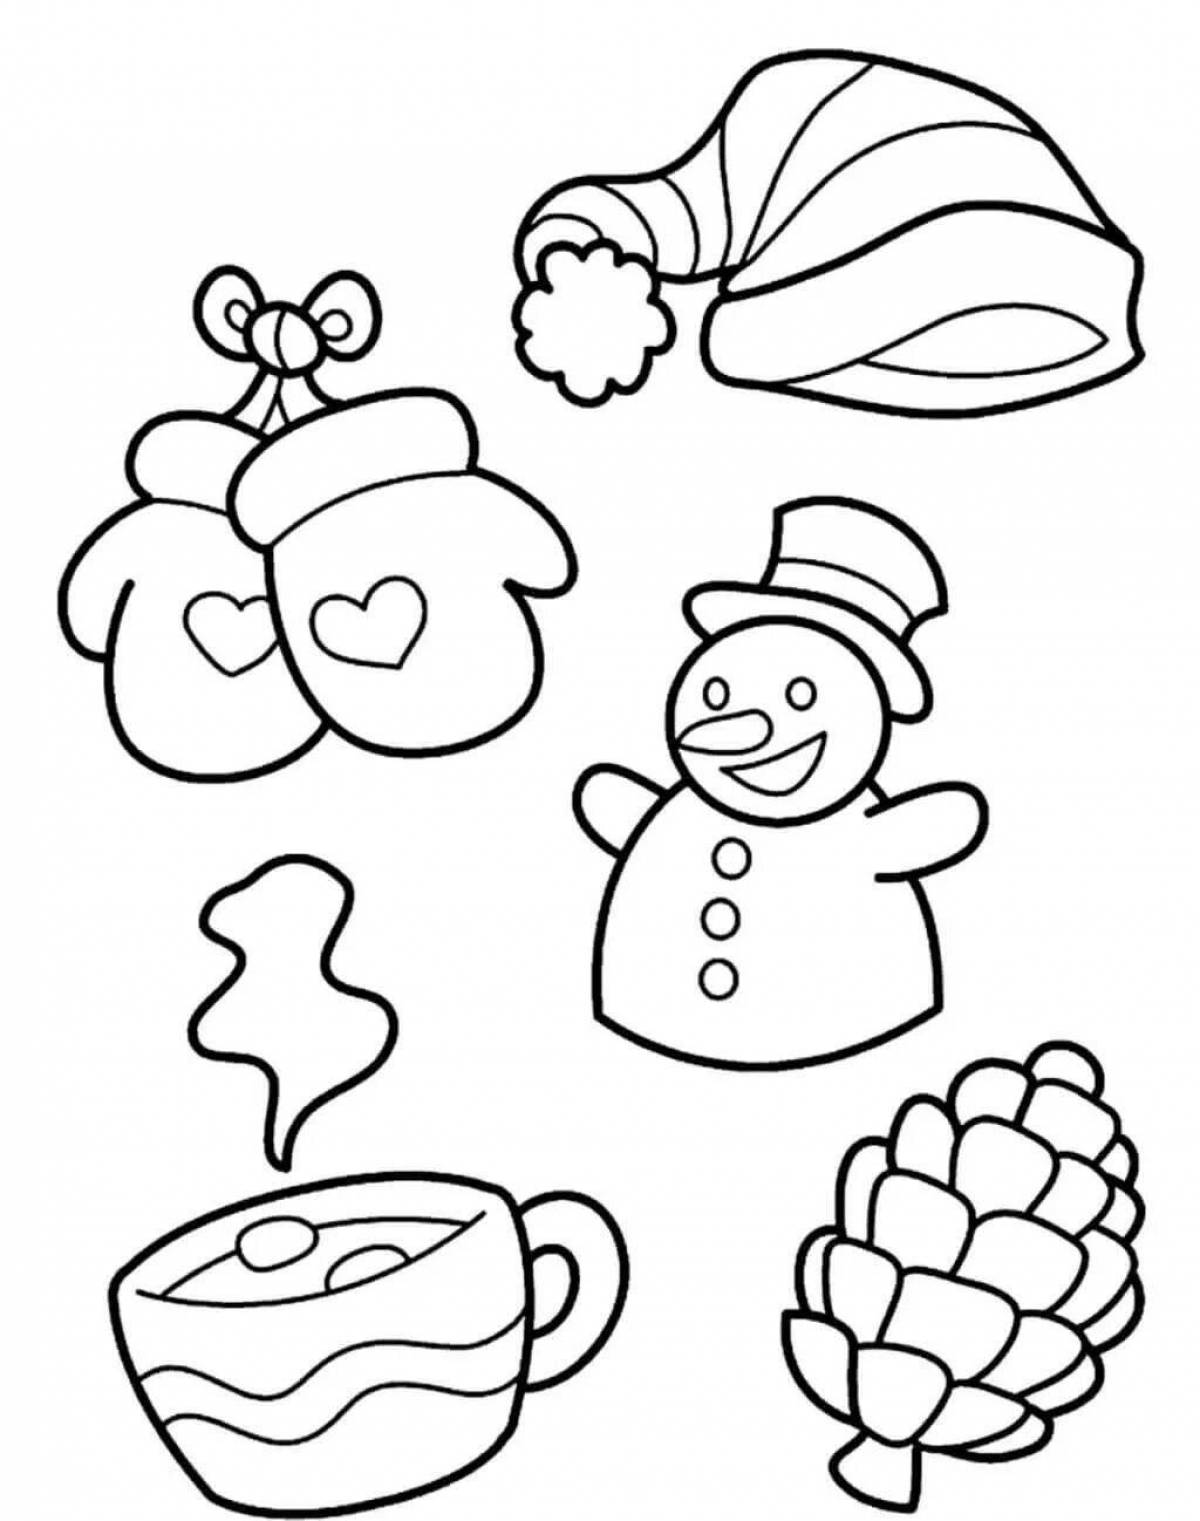 Exquisite winter coloring book for kids 2-3 years old